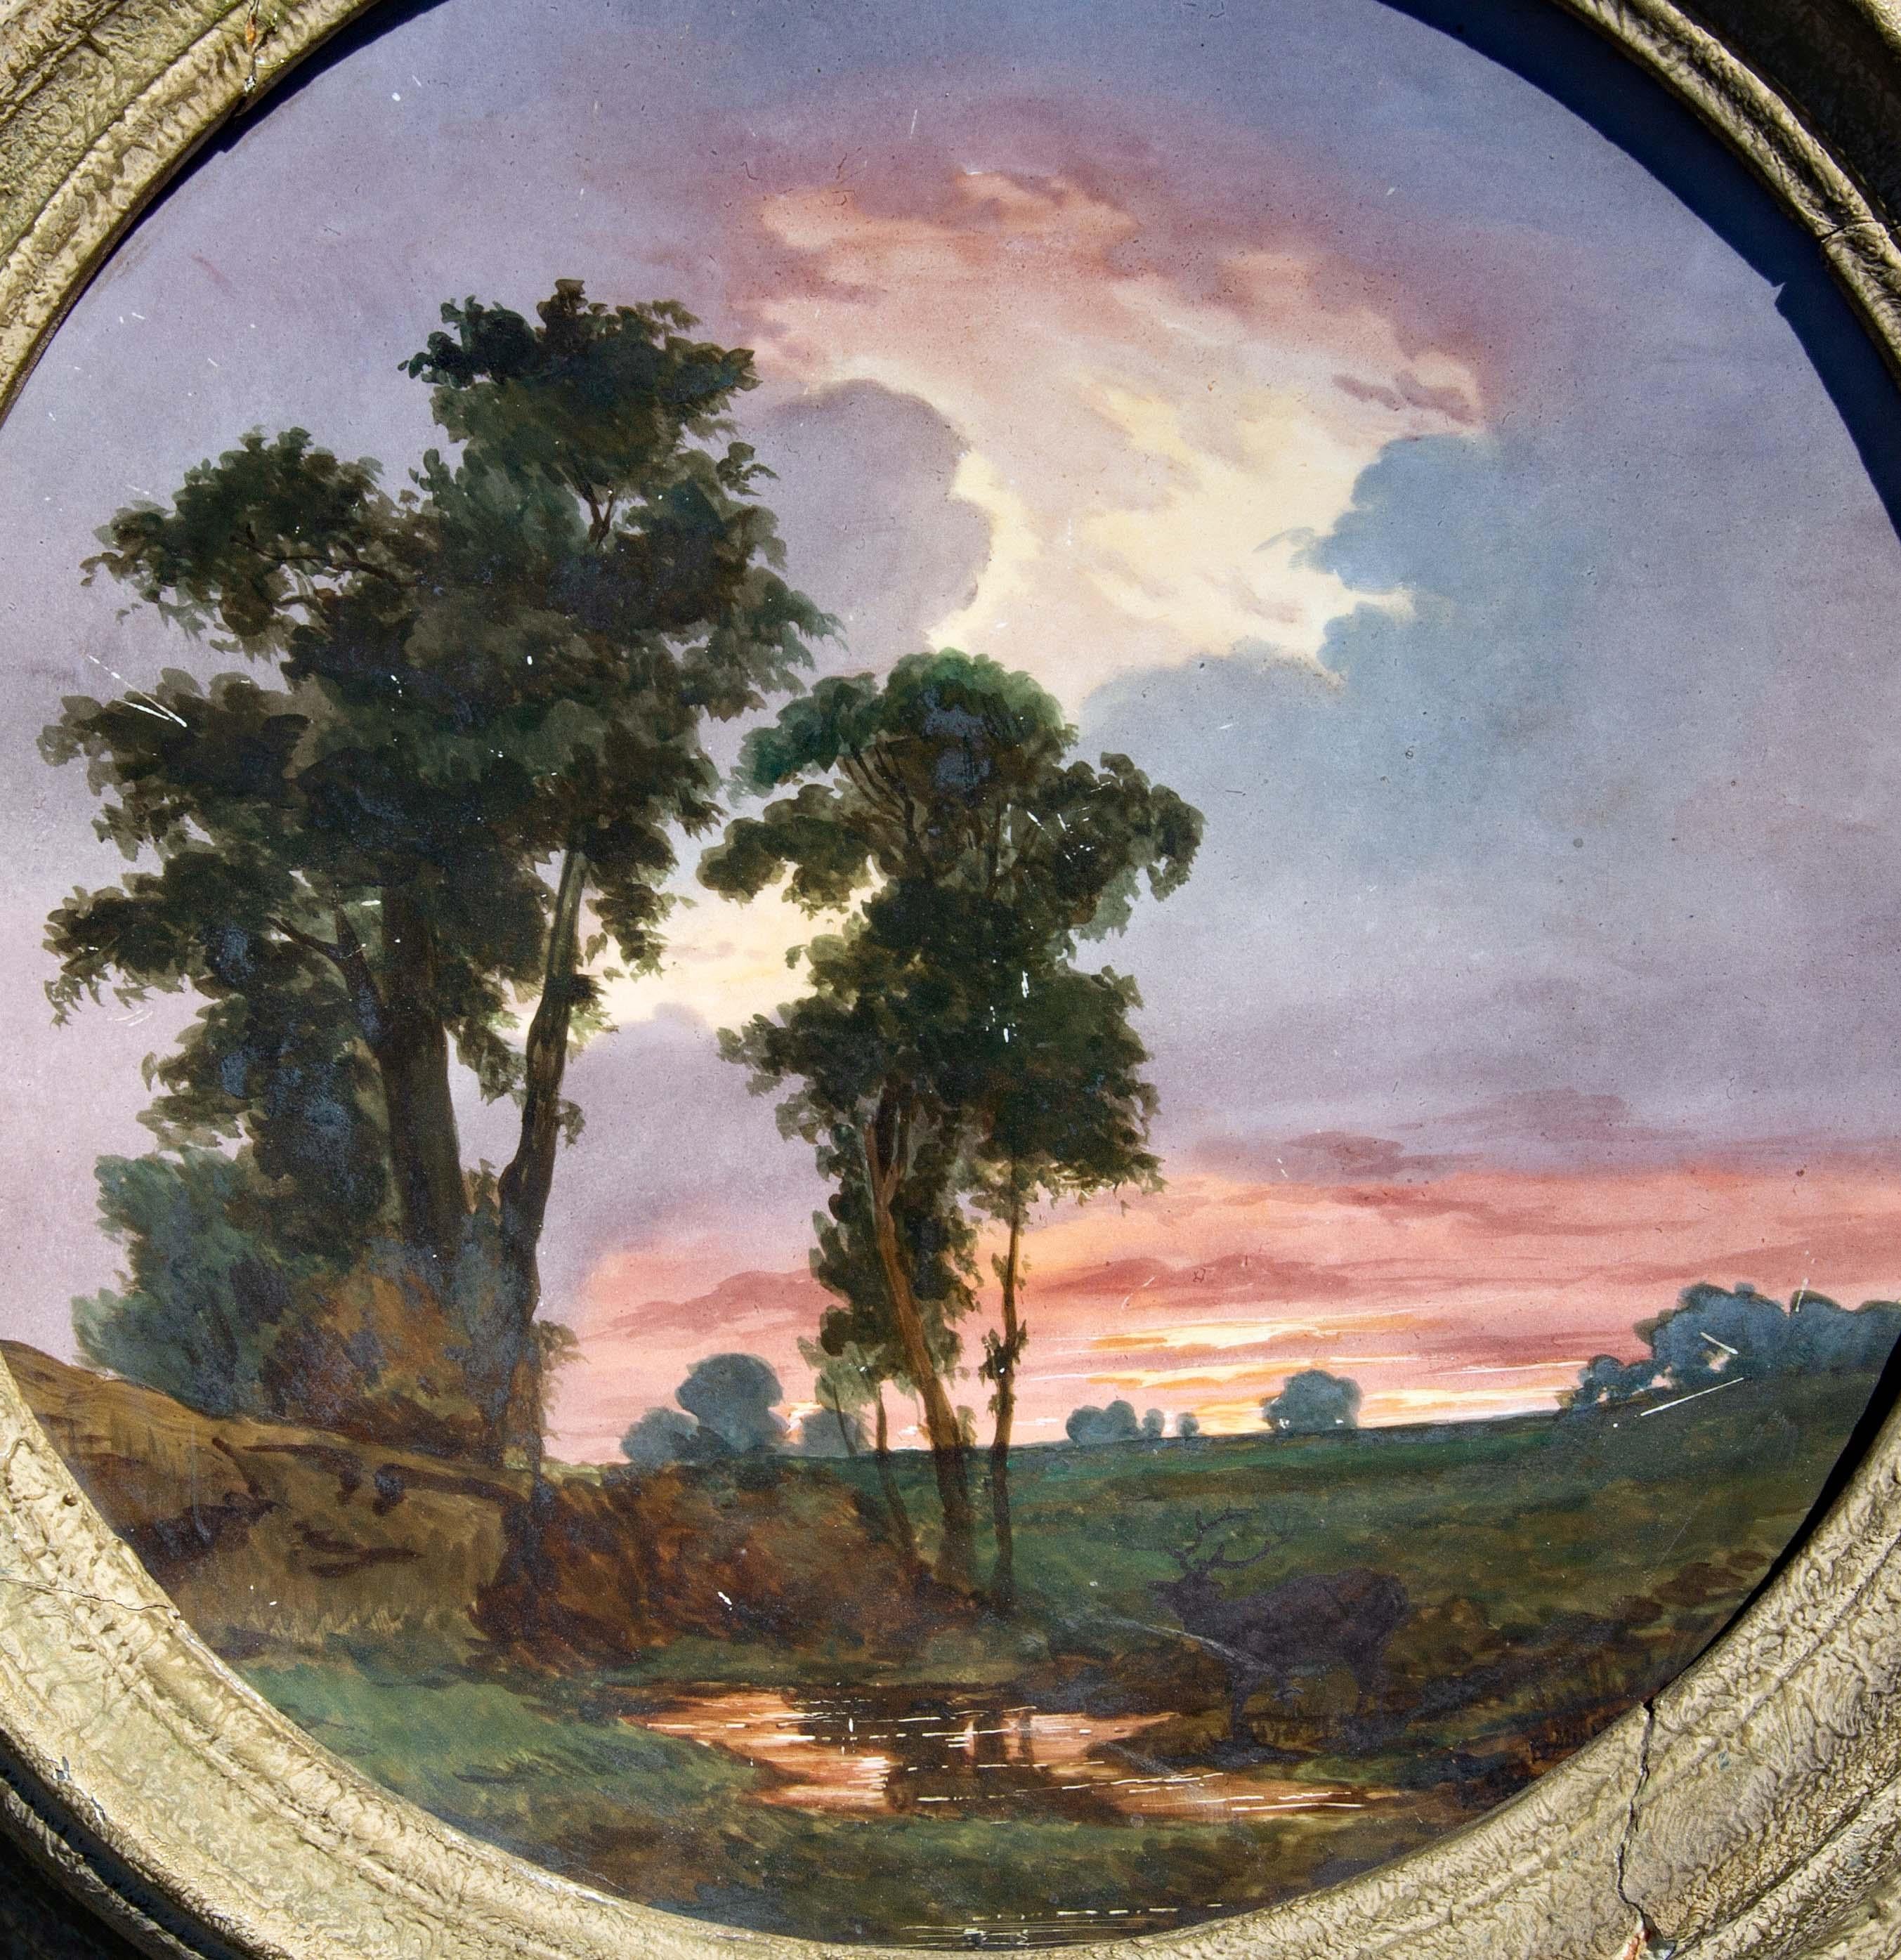 Barbizon Landscape Painting on French Porcelain Charger 19th Century by Millet In Good Condition For Sale In Rochester, NY